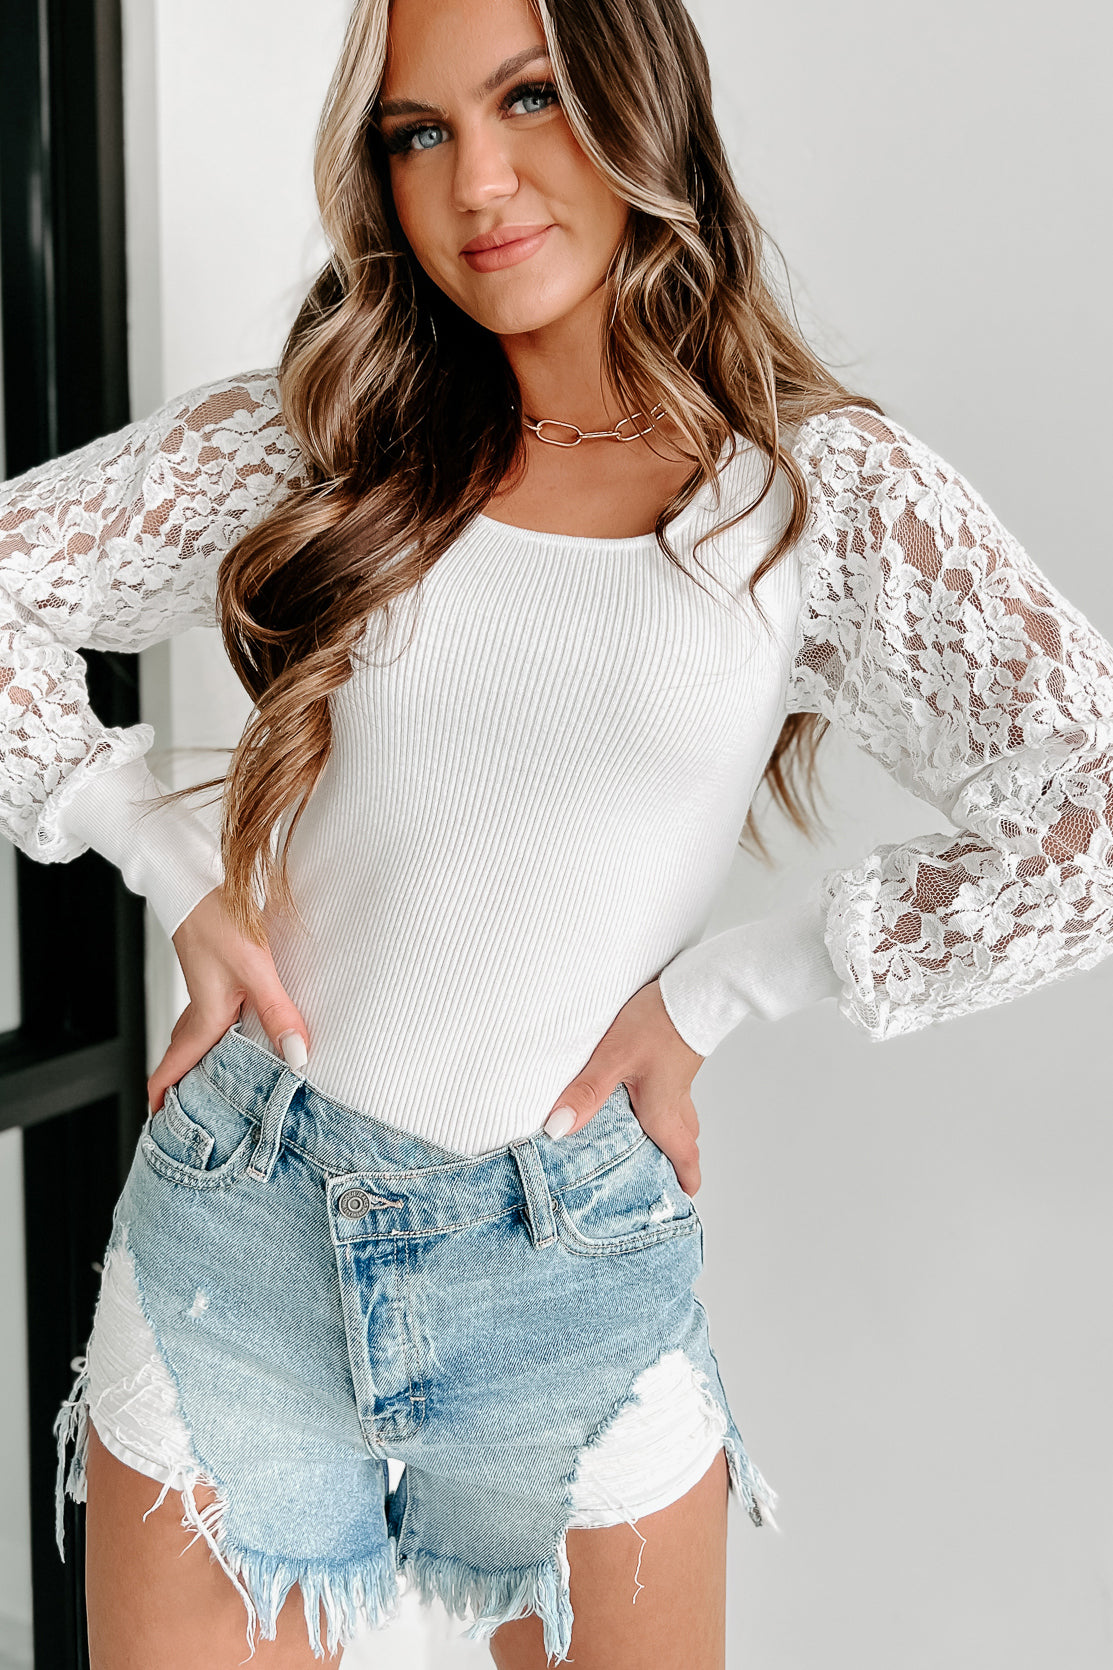 Best Of Times Ribbed Lace Sleeve Top (White) - NanaMacs